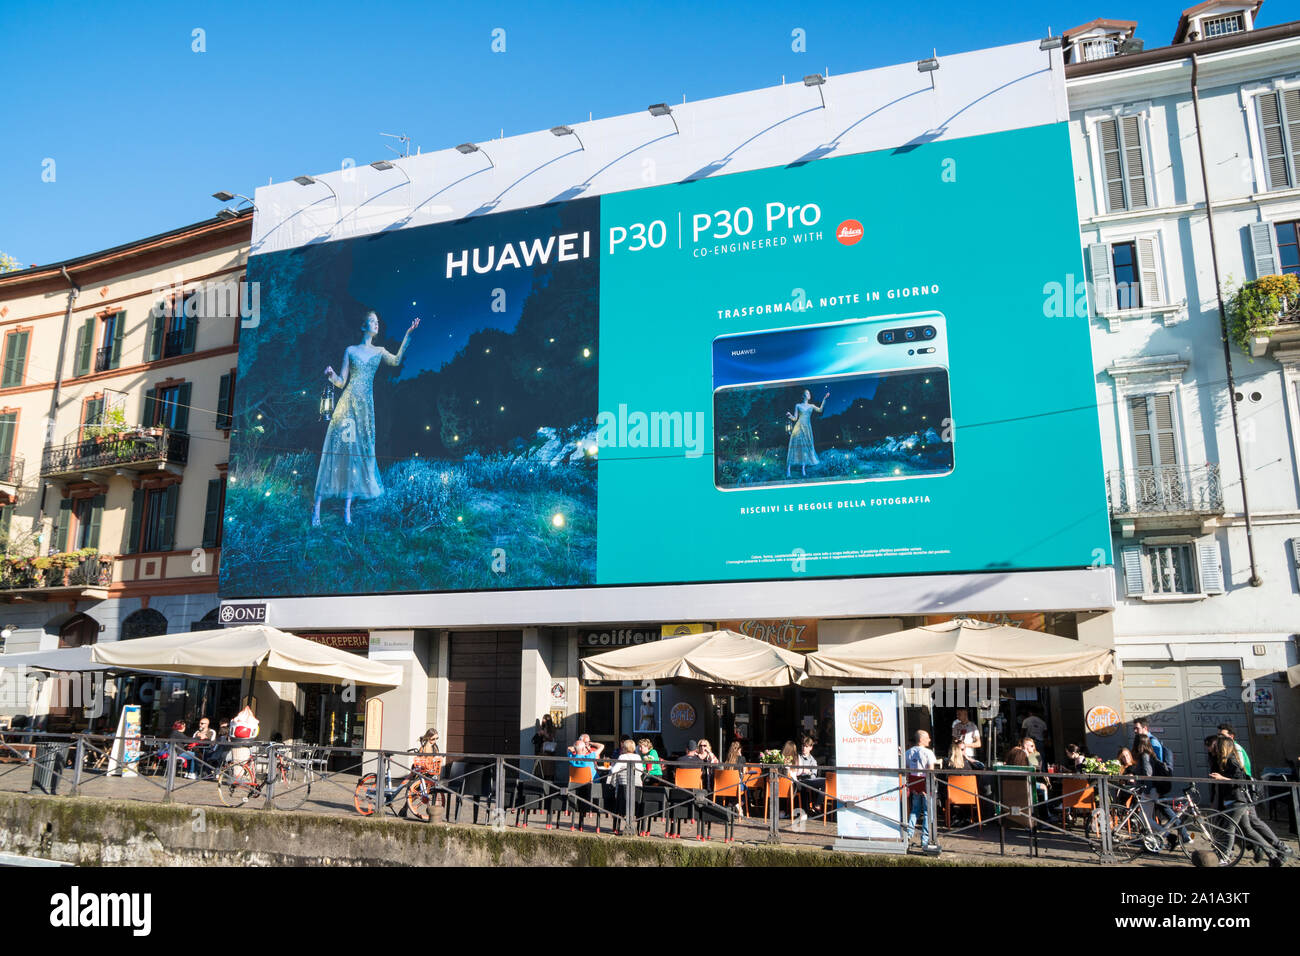 Milan, Italy: Giant advertising billboard for the promotion of the P30 and P30 Plus, the new smartphones from Huawei, in the Navigli district Stock Photo